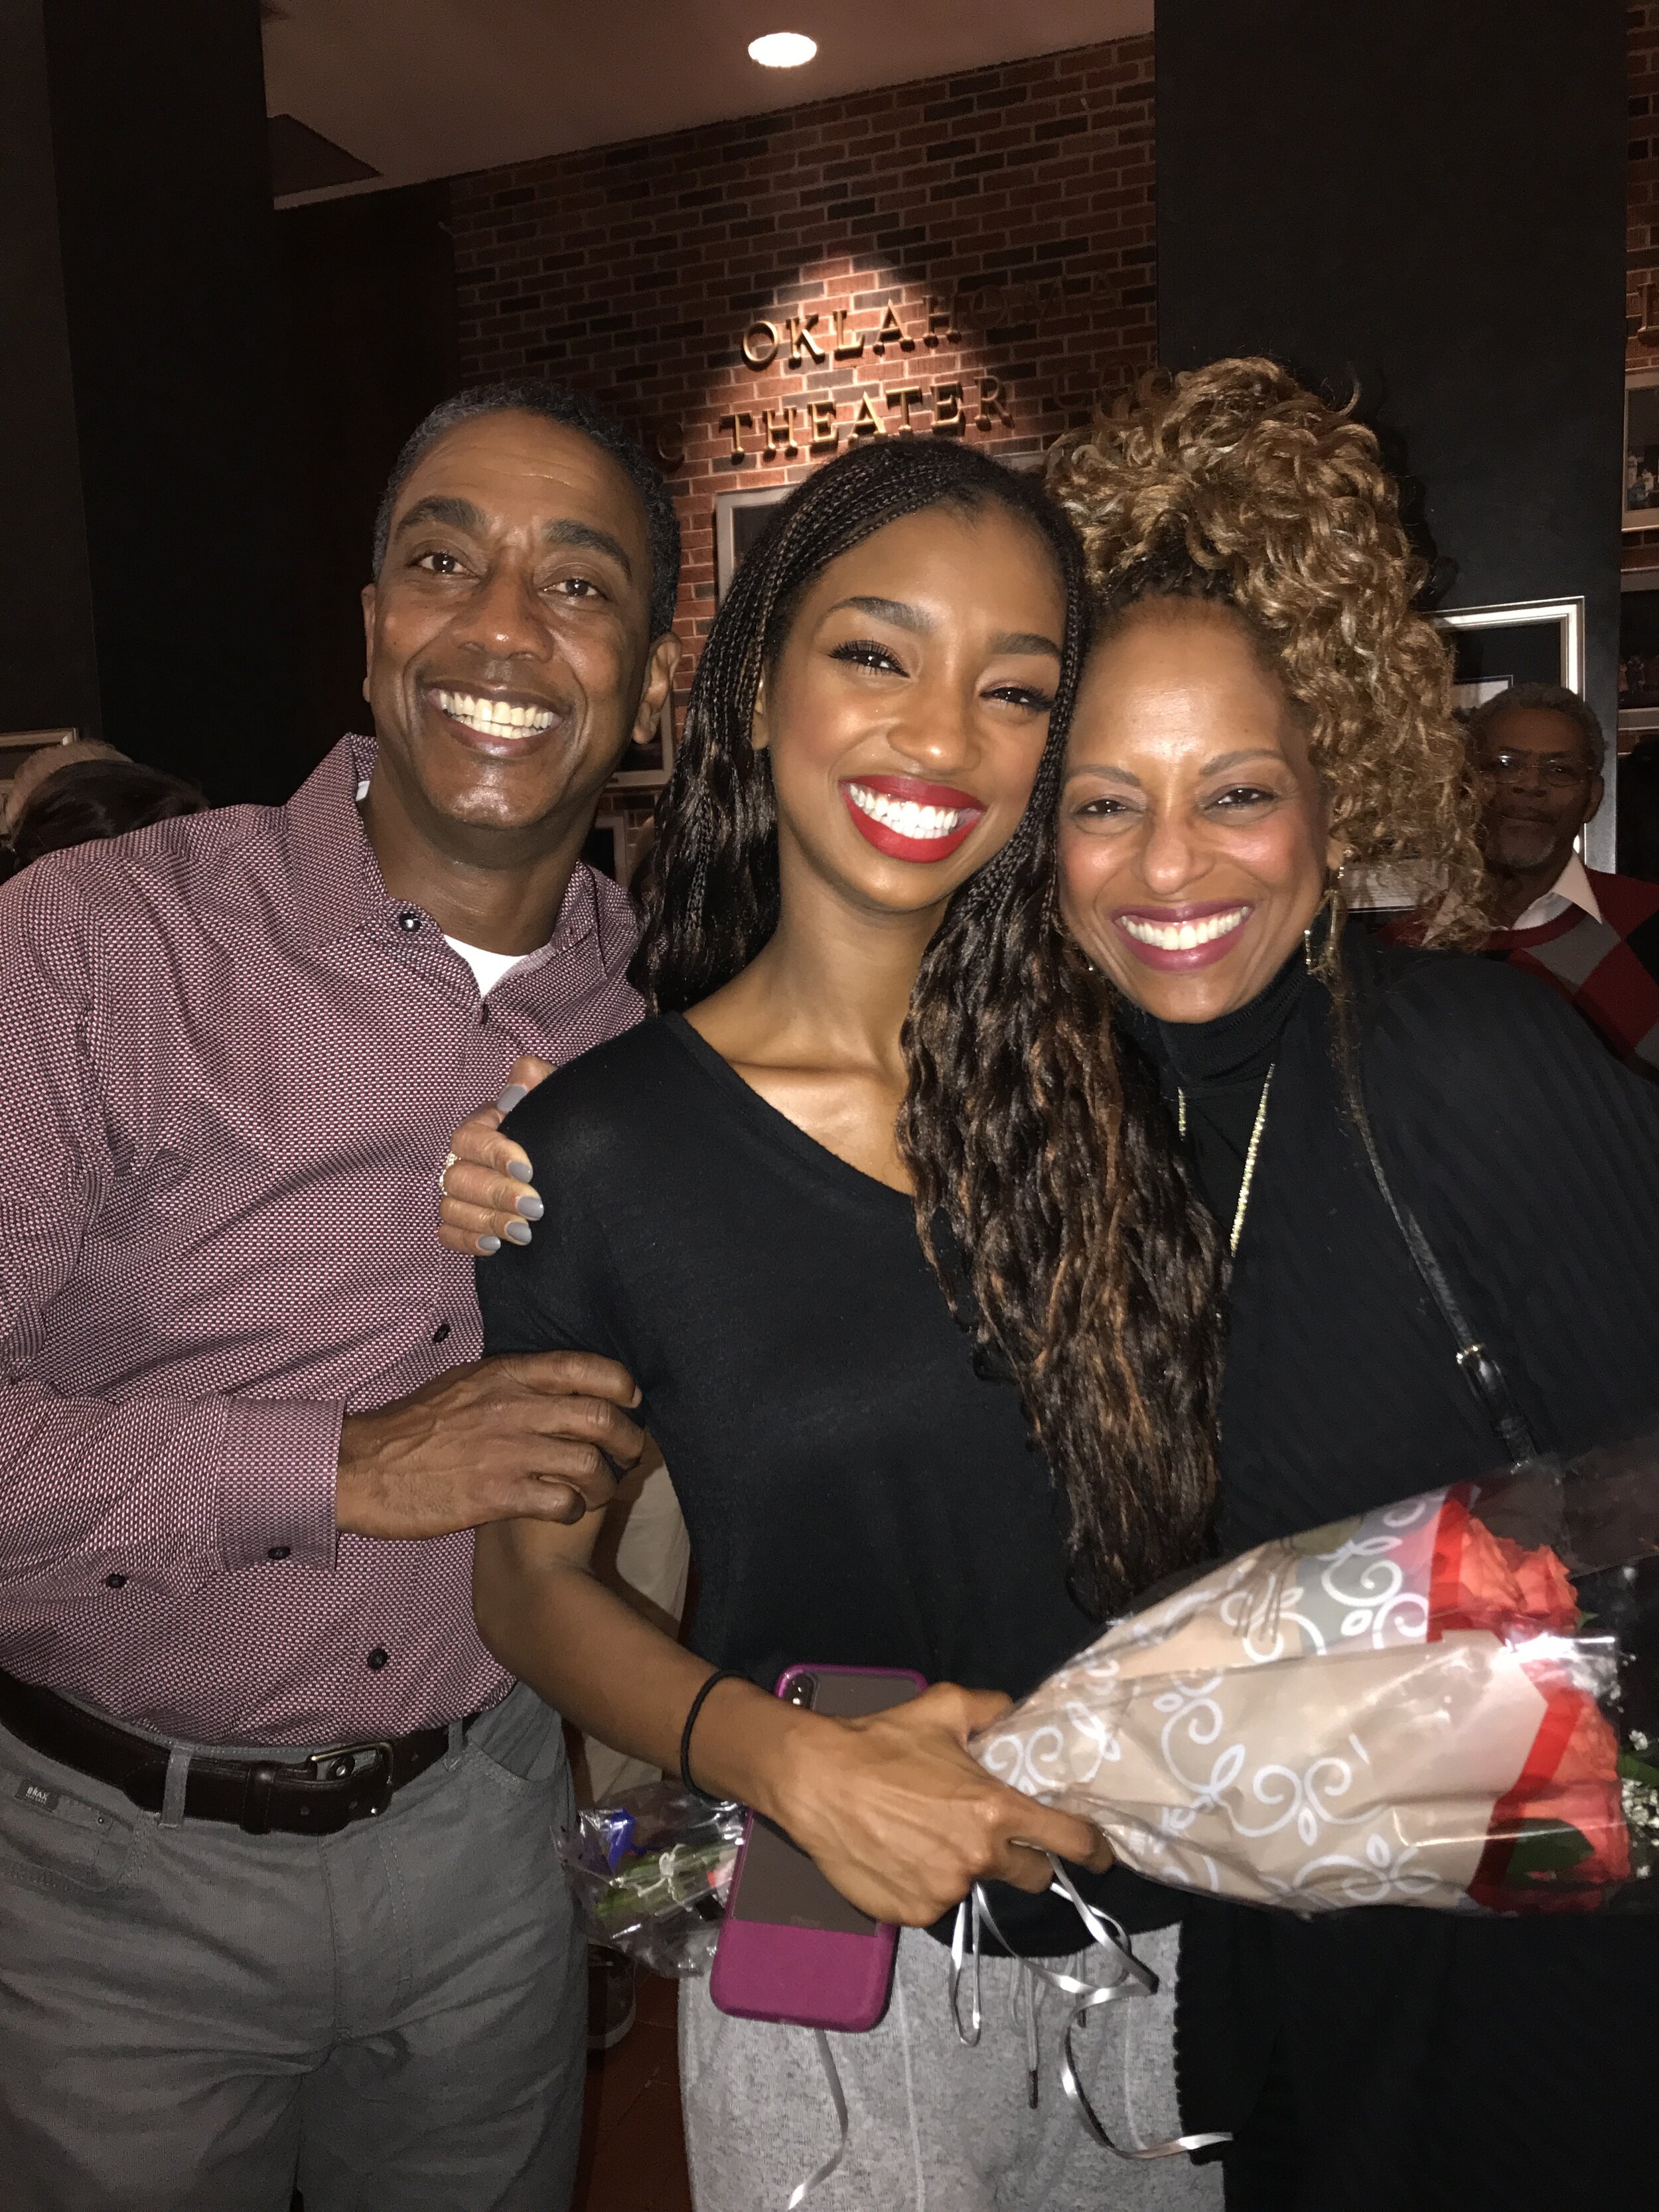 Michelle, her hubby, the Honorable Brian C. Wimes (appointed by Barack Obama in April 2012) and their oldest daughter, Sydney, a professional dancer and May 2019 graduate of Oklahoma City University. 